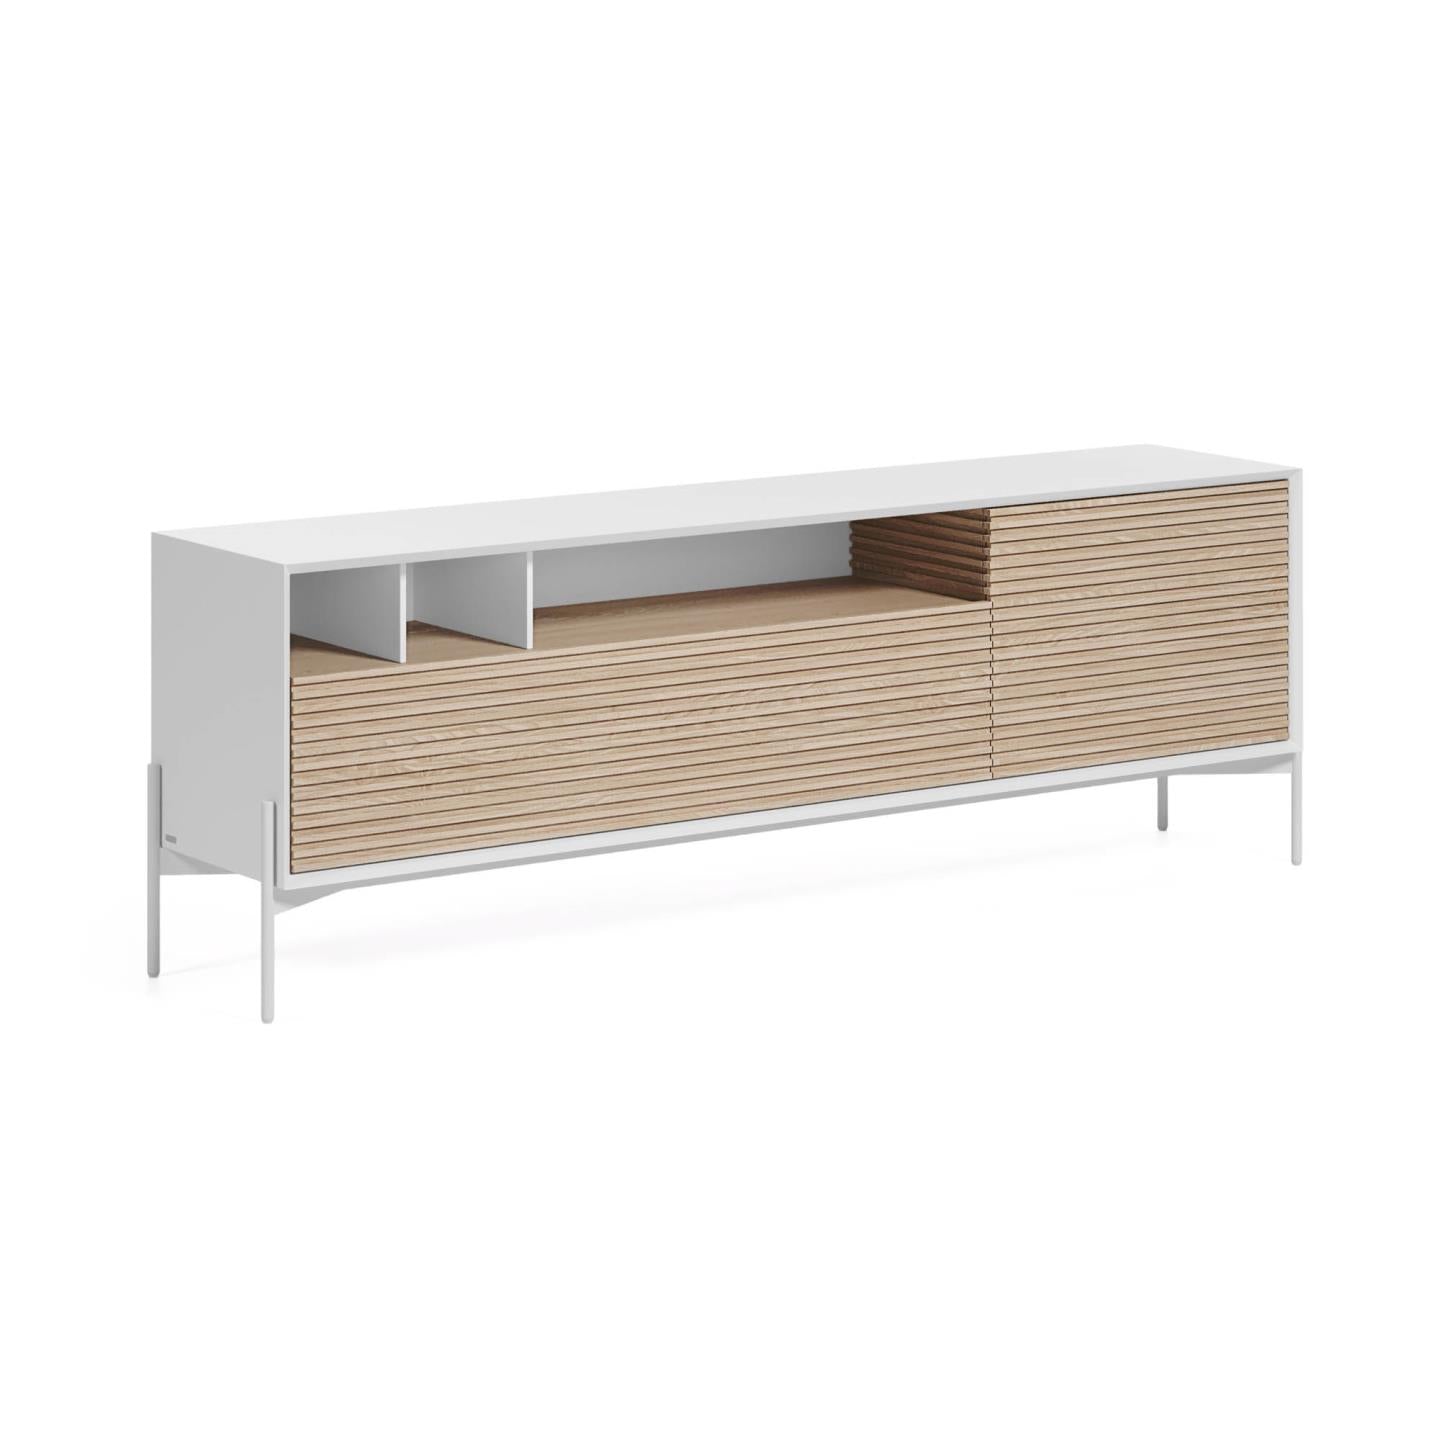 Marielle 2 door TV stand in ash wood veneer with white lacquer & white finish metal, 187 x 63 cm